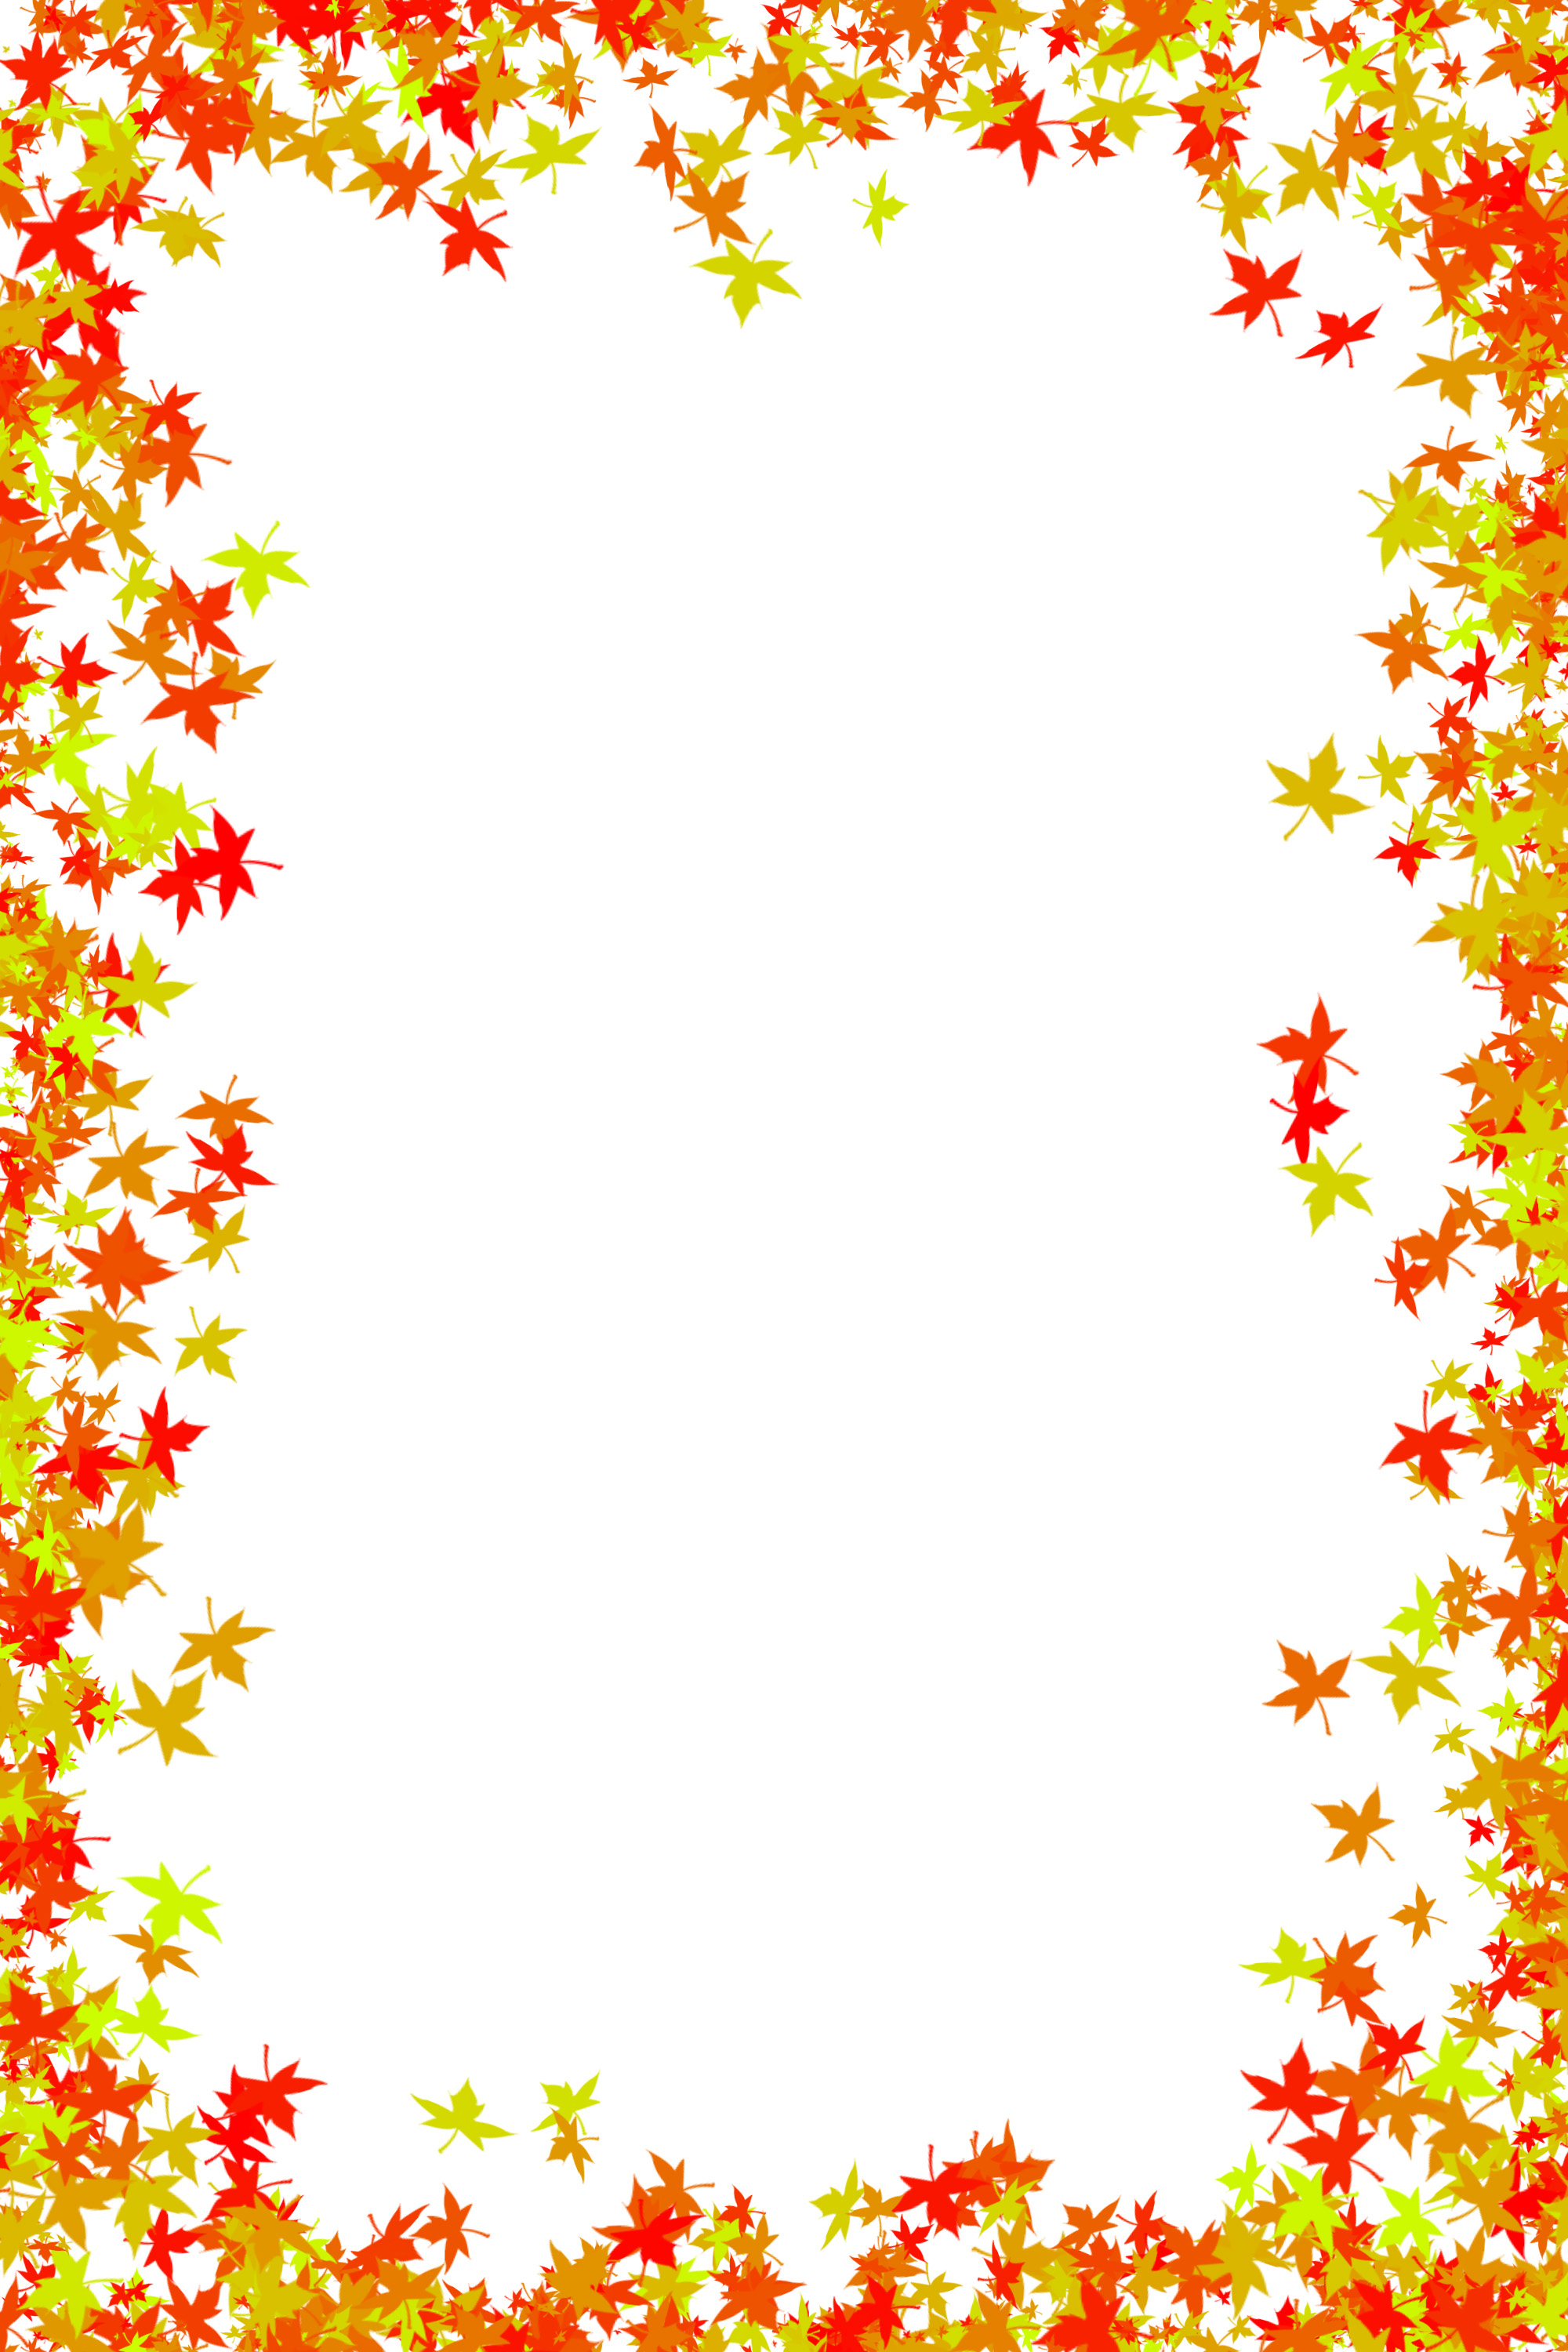 Fall Leaves Clip Art Border   Search Results   Landscaping Gallery